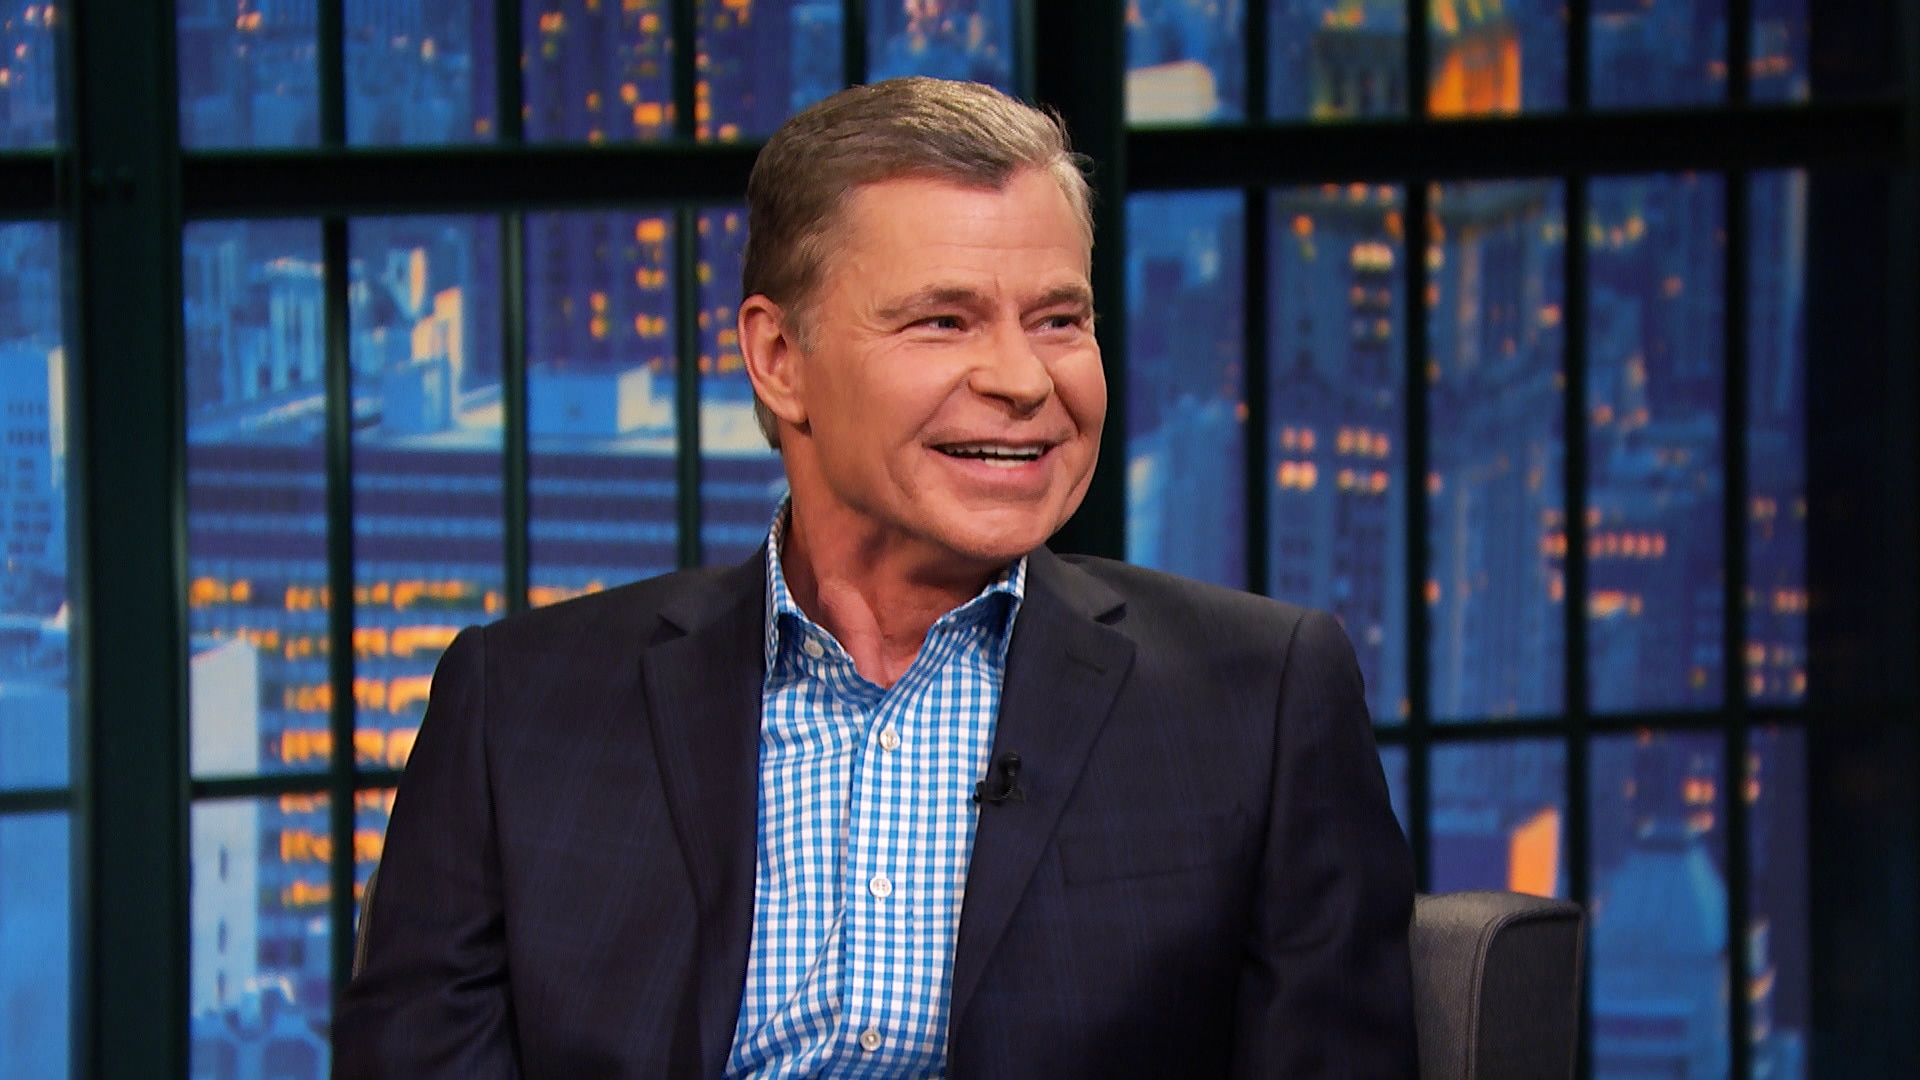 Watch Late Night with Seth Meyers Interview: Dan Patrick Interview